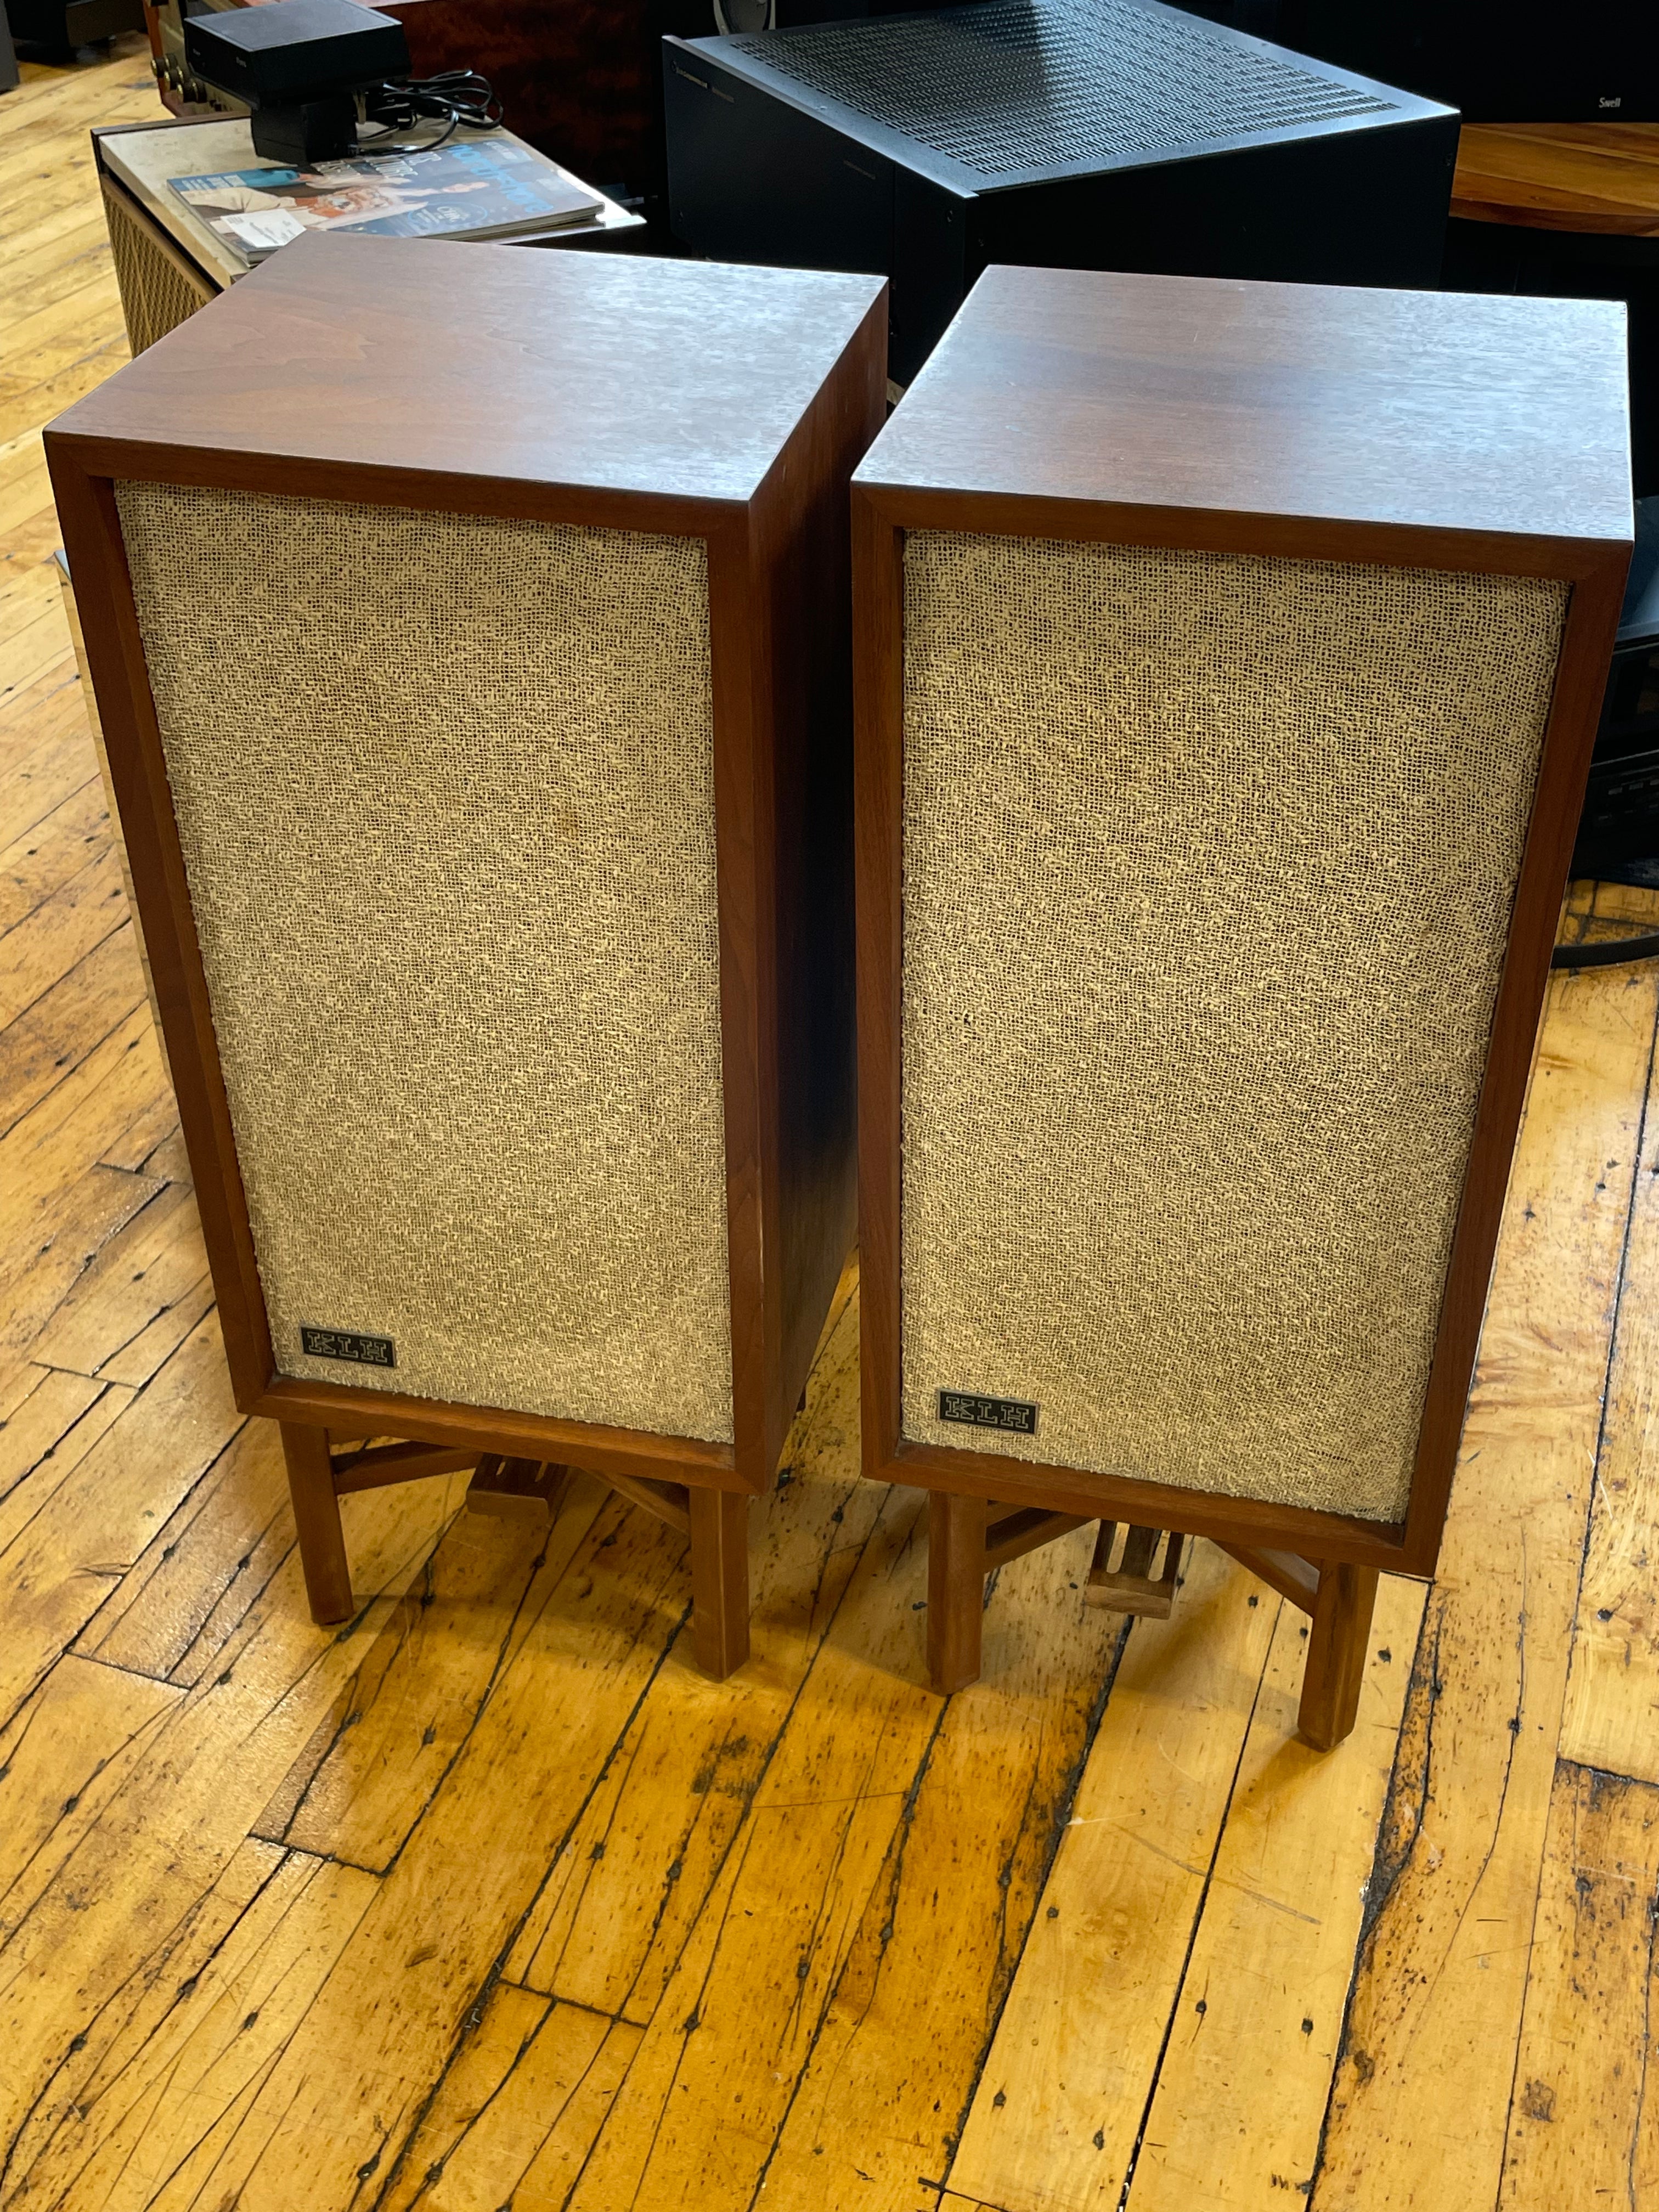 KLH Six - Exceptional Condition!